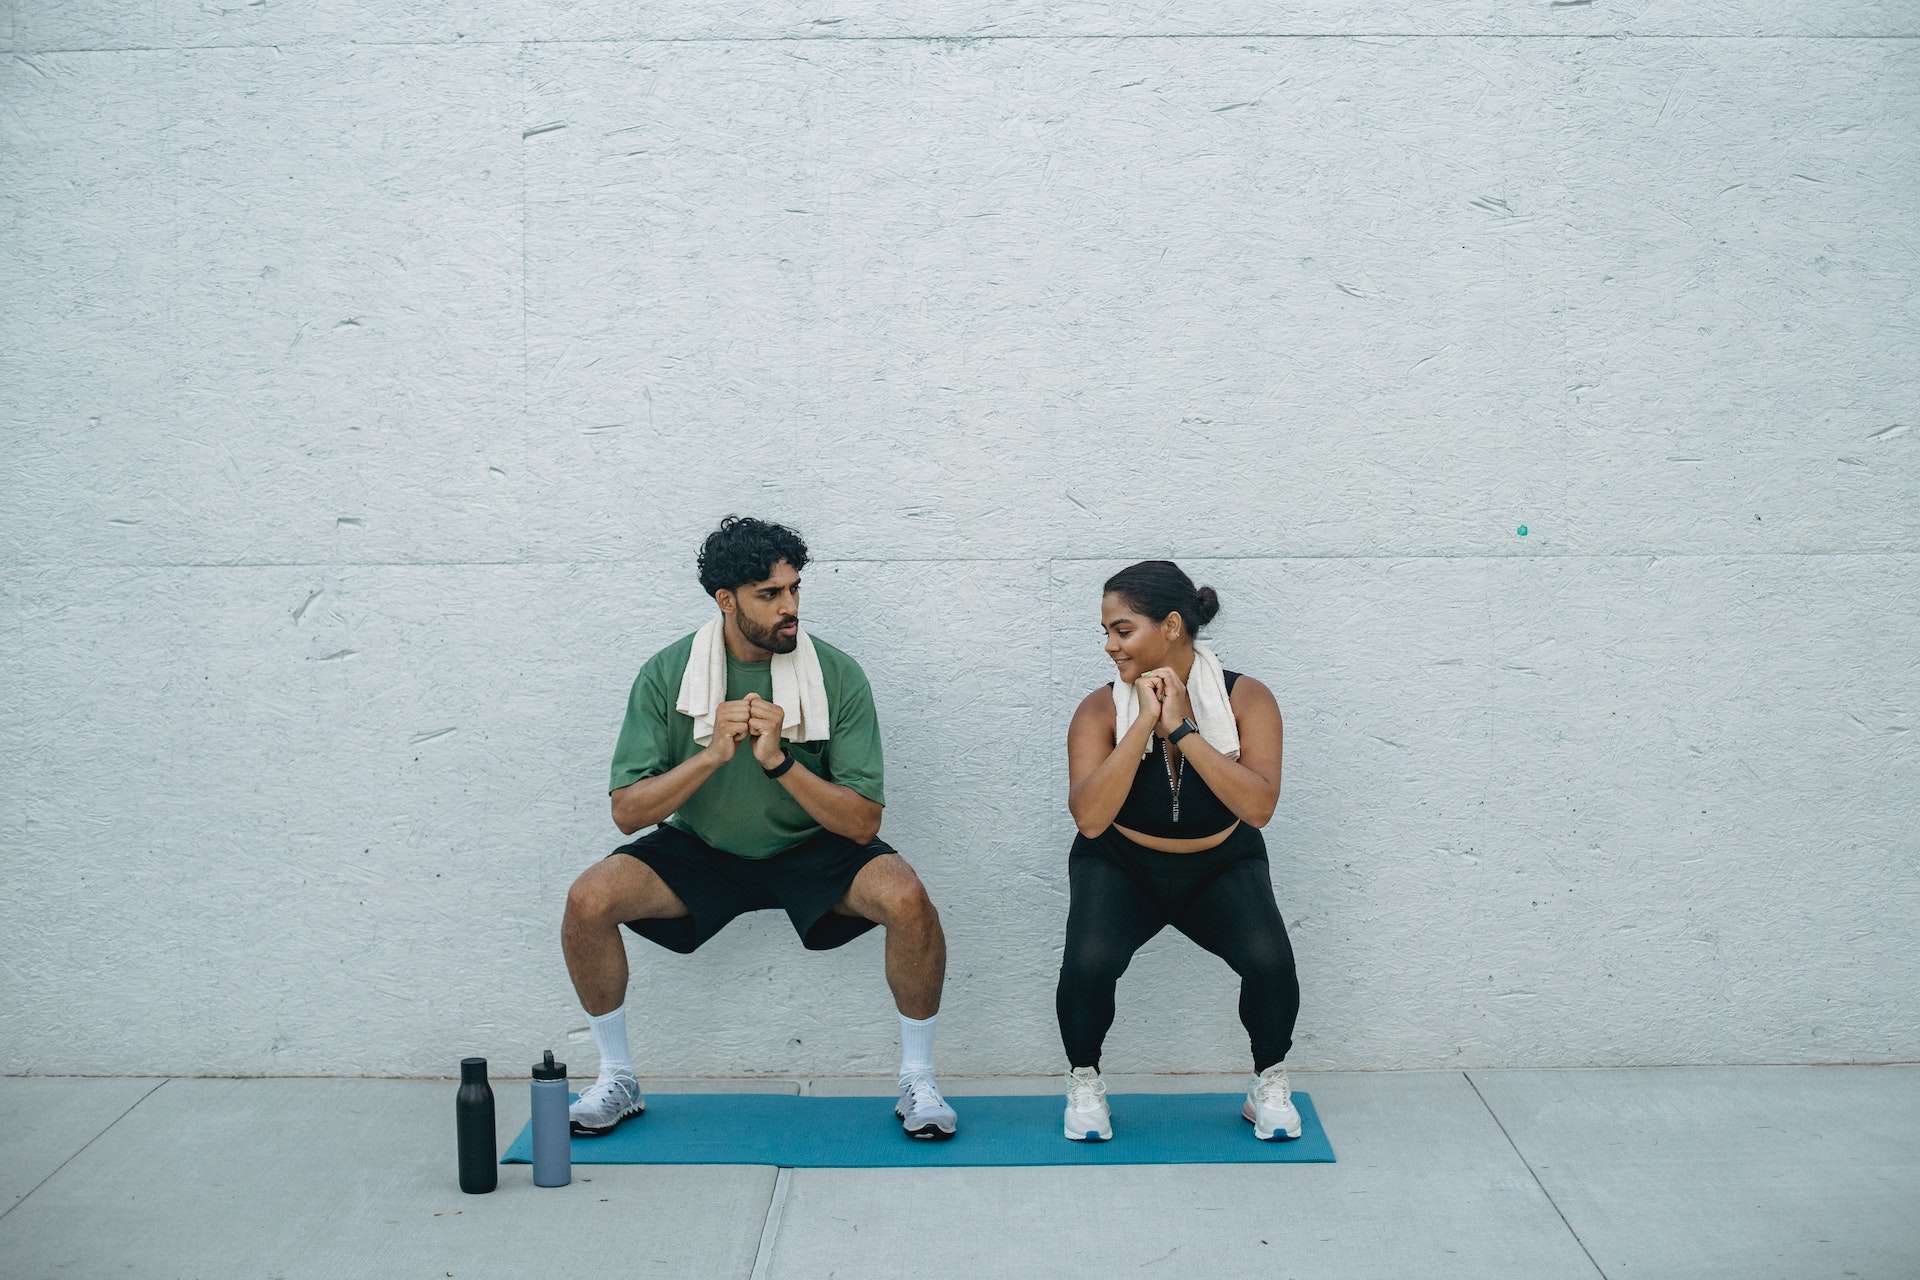 Man and Woman Doing Squats during a Workout
